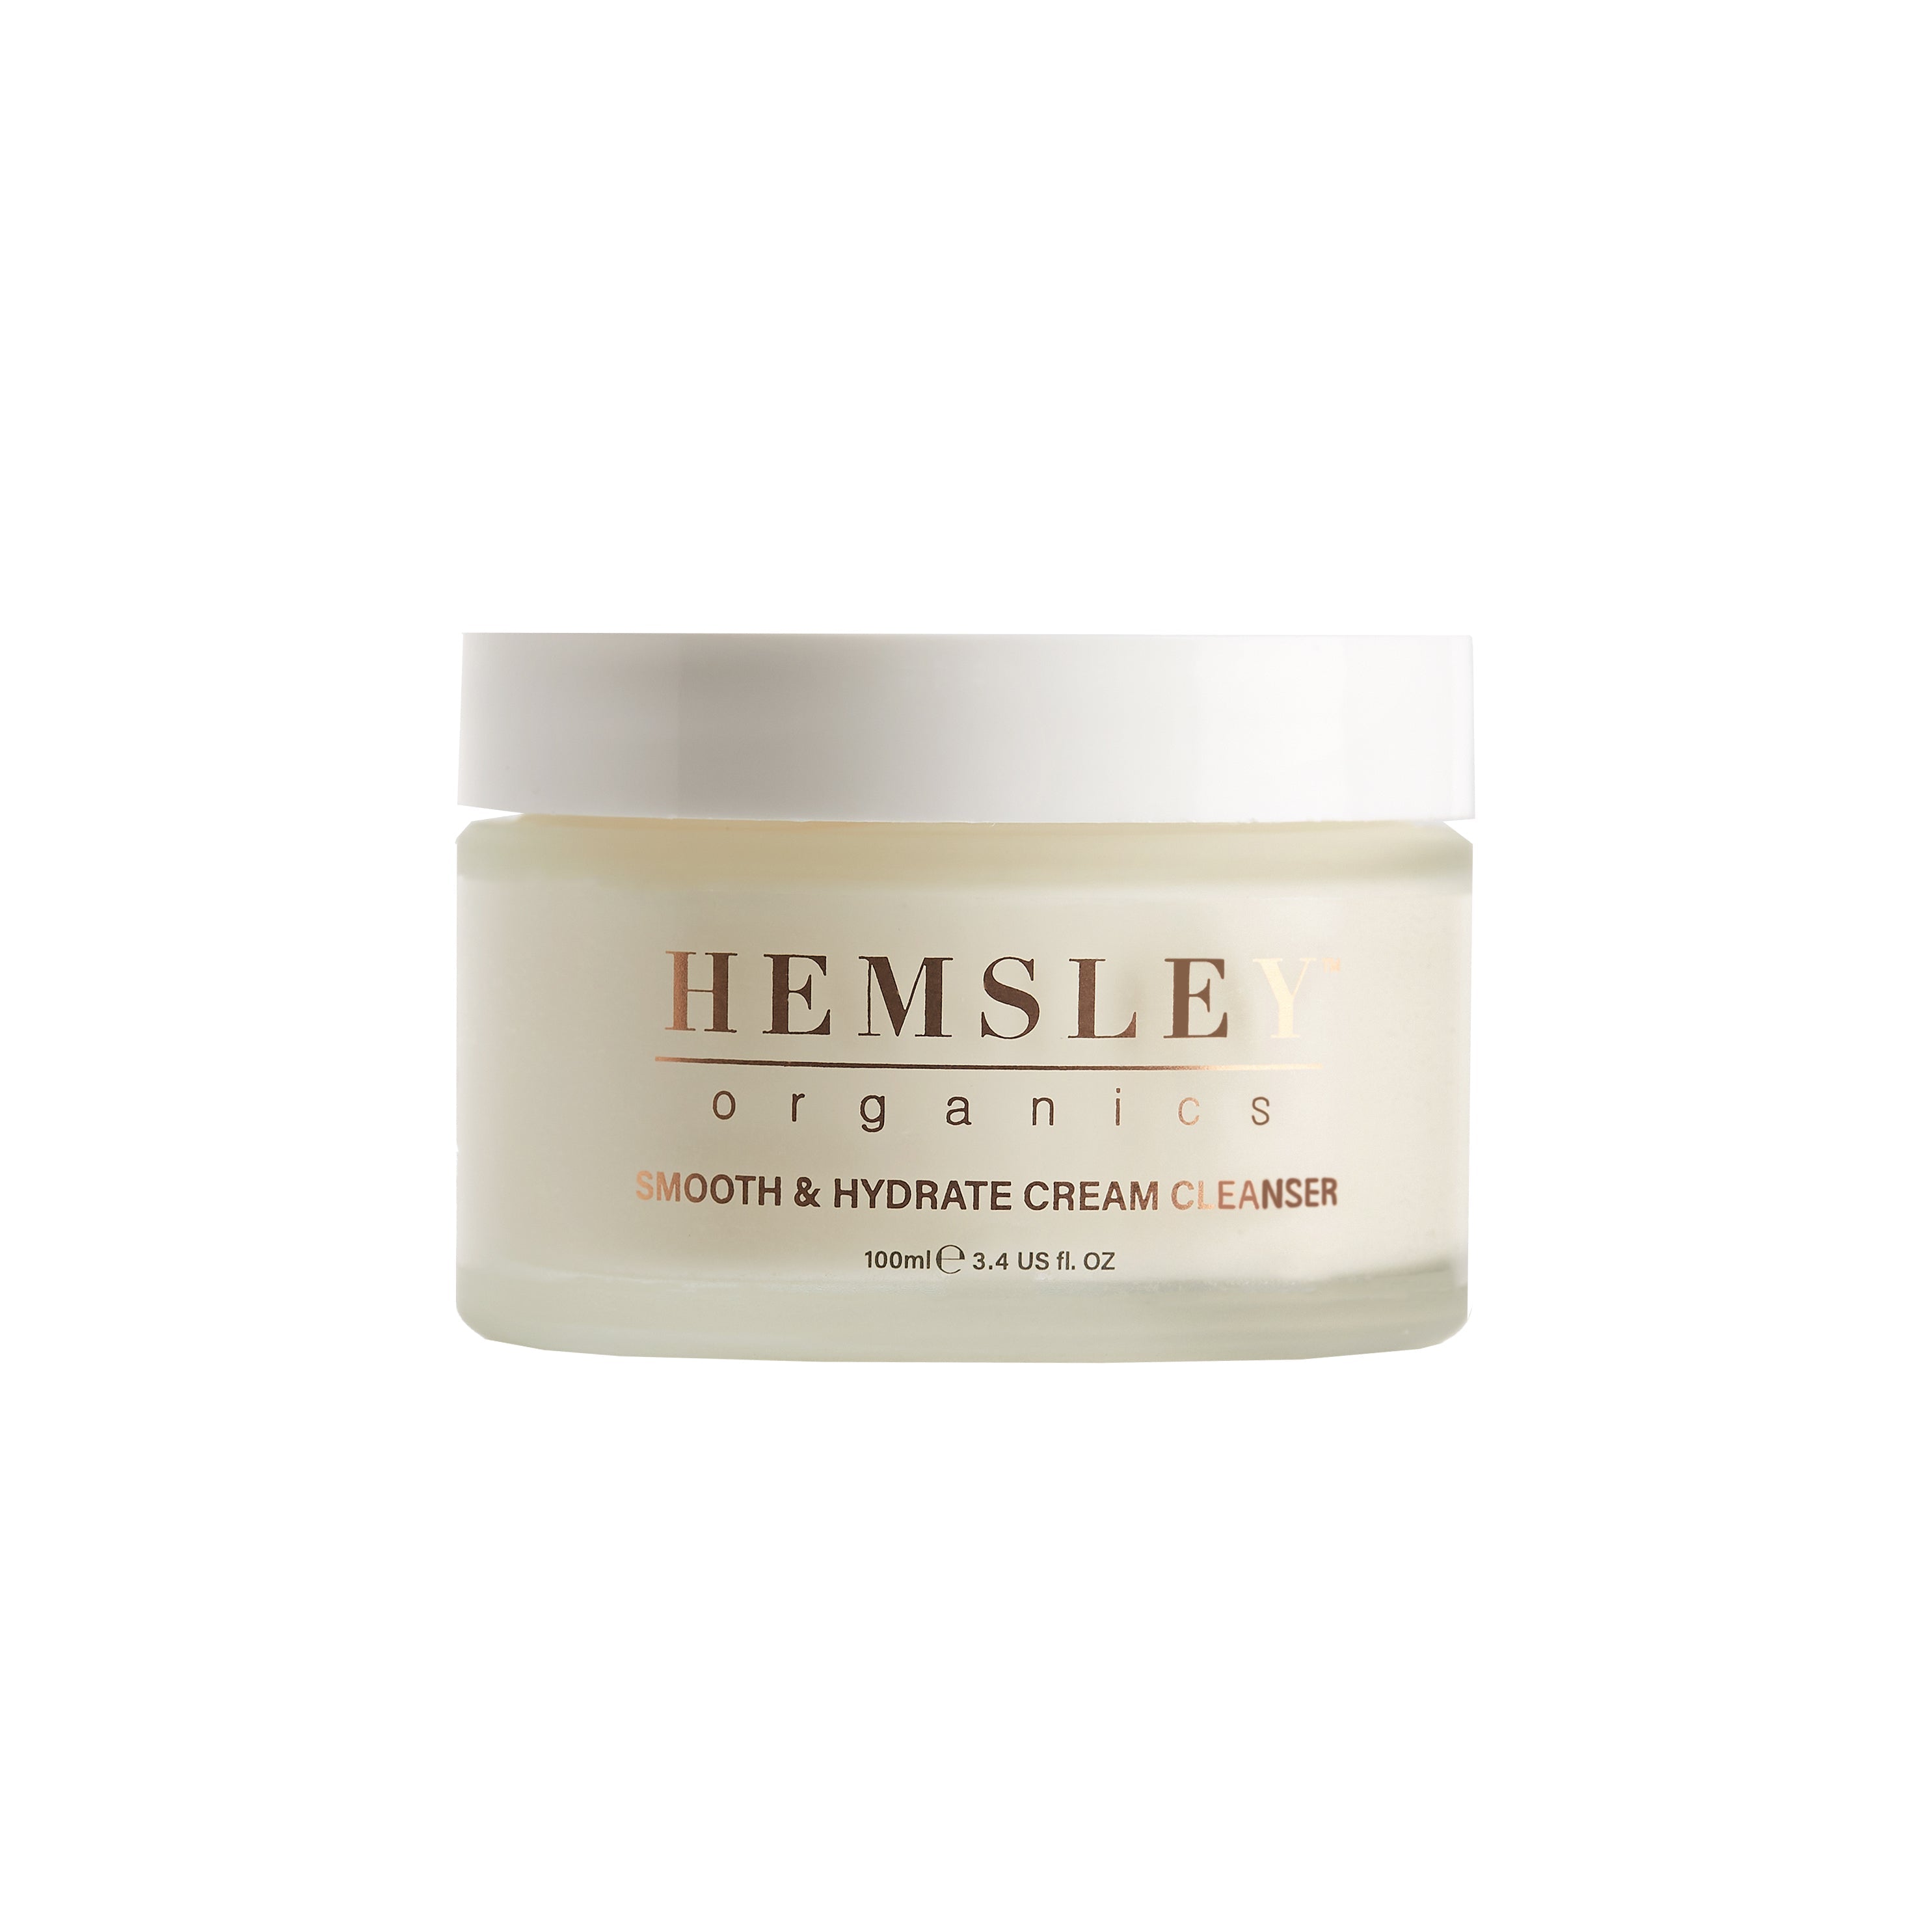 Smooth & Hydrate Cream Cleanser